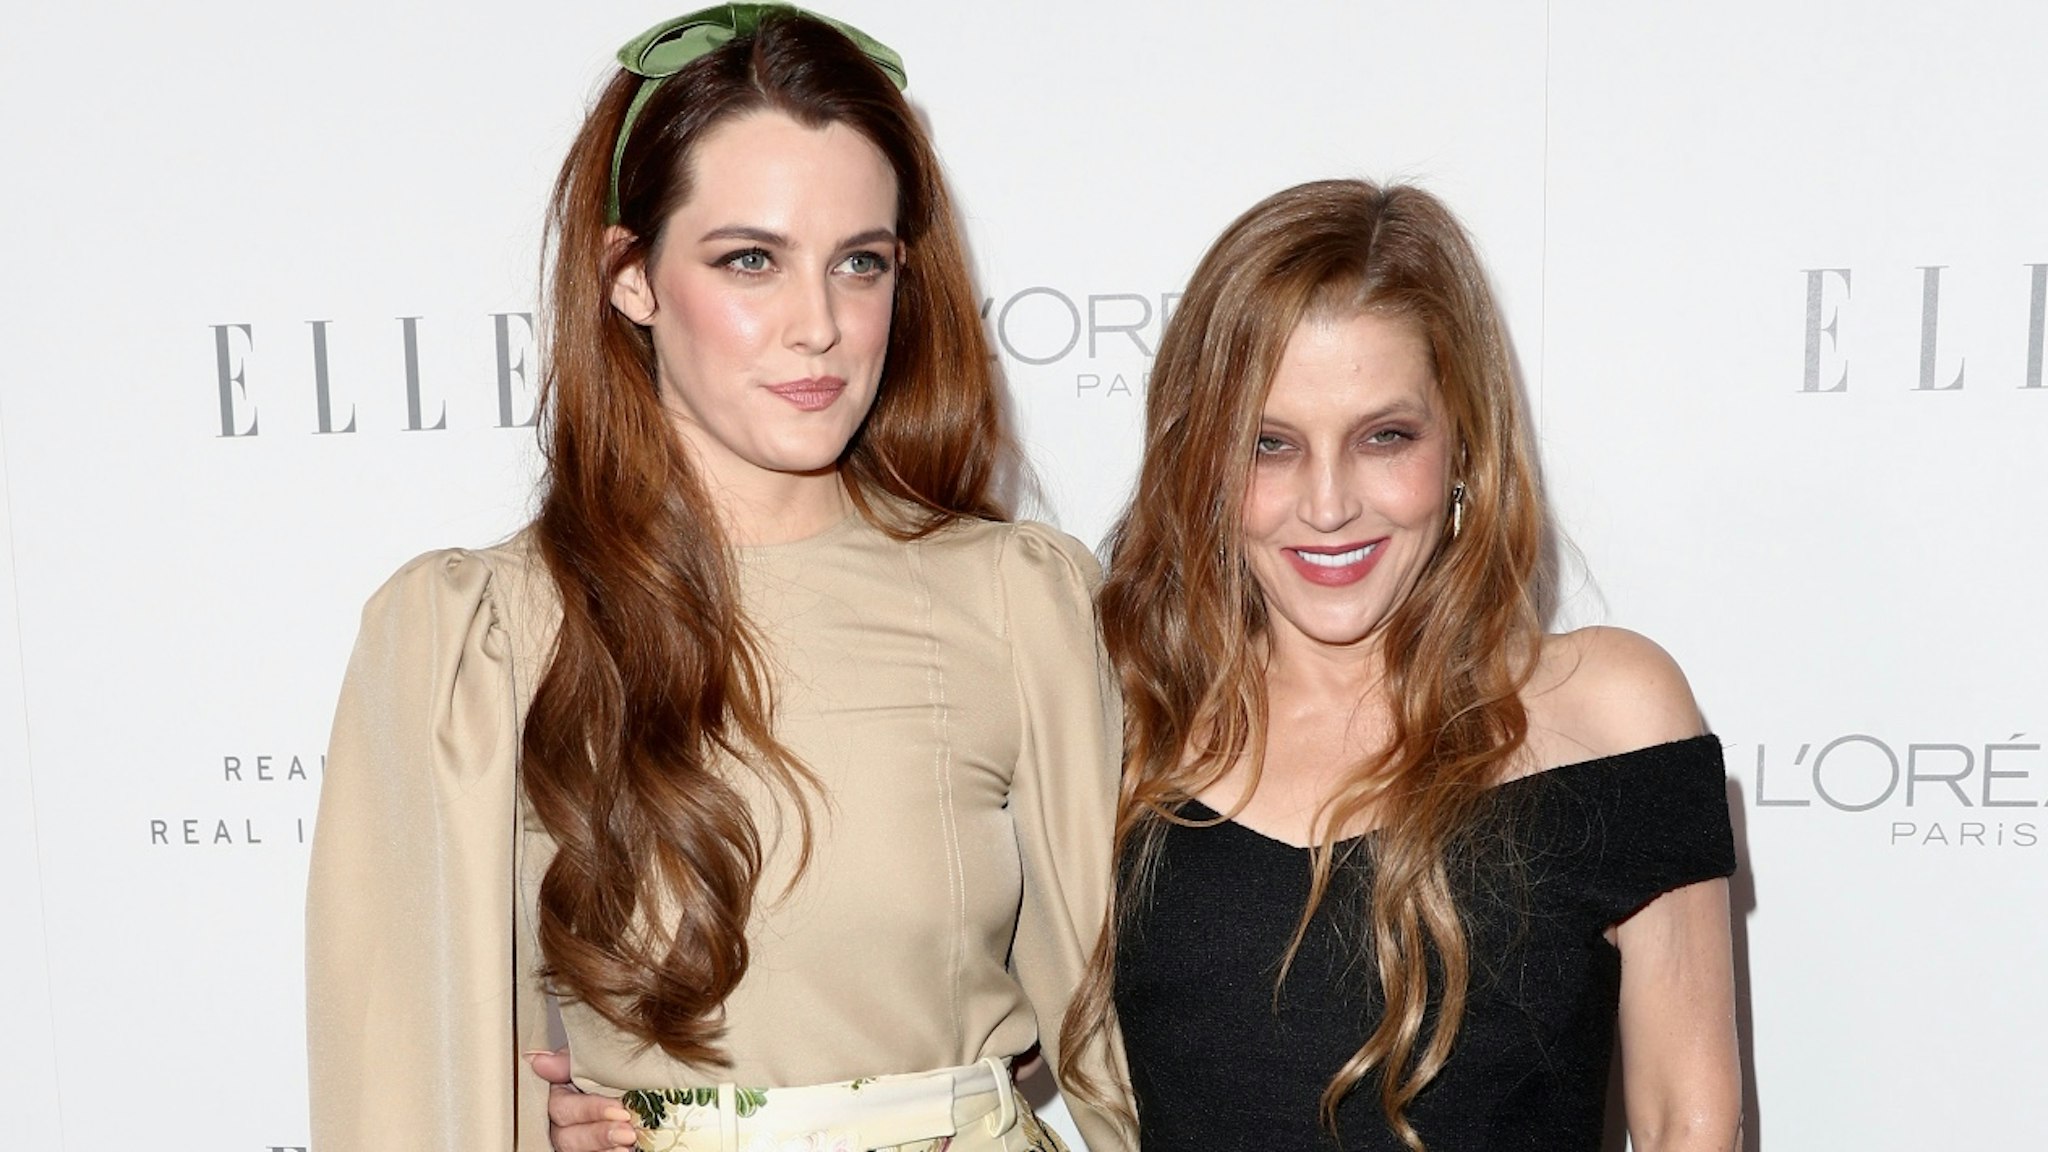 Riley Keough (L) and Lisa Marie Presley attend ELLE's 24th Annual Women in Hollywood Celebration at Four Seasons Hotel Los Angeles at Beverly Hills on October 16, 2017 in Los Angeles, California.